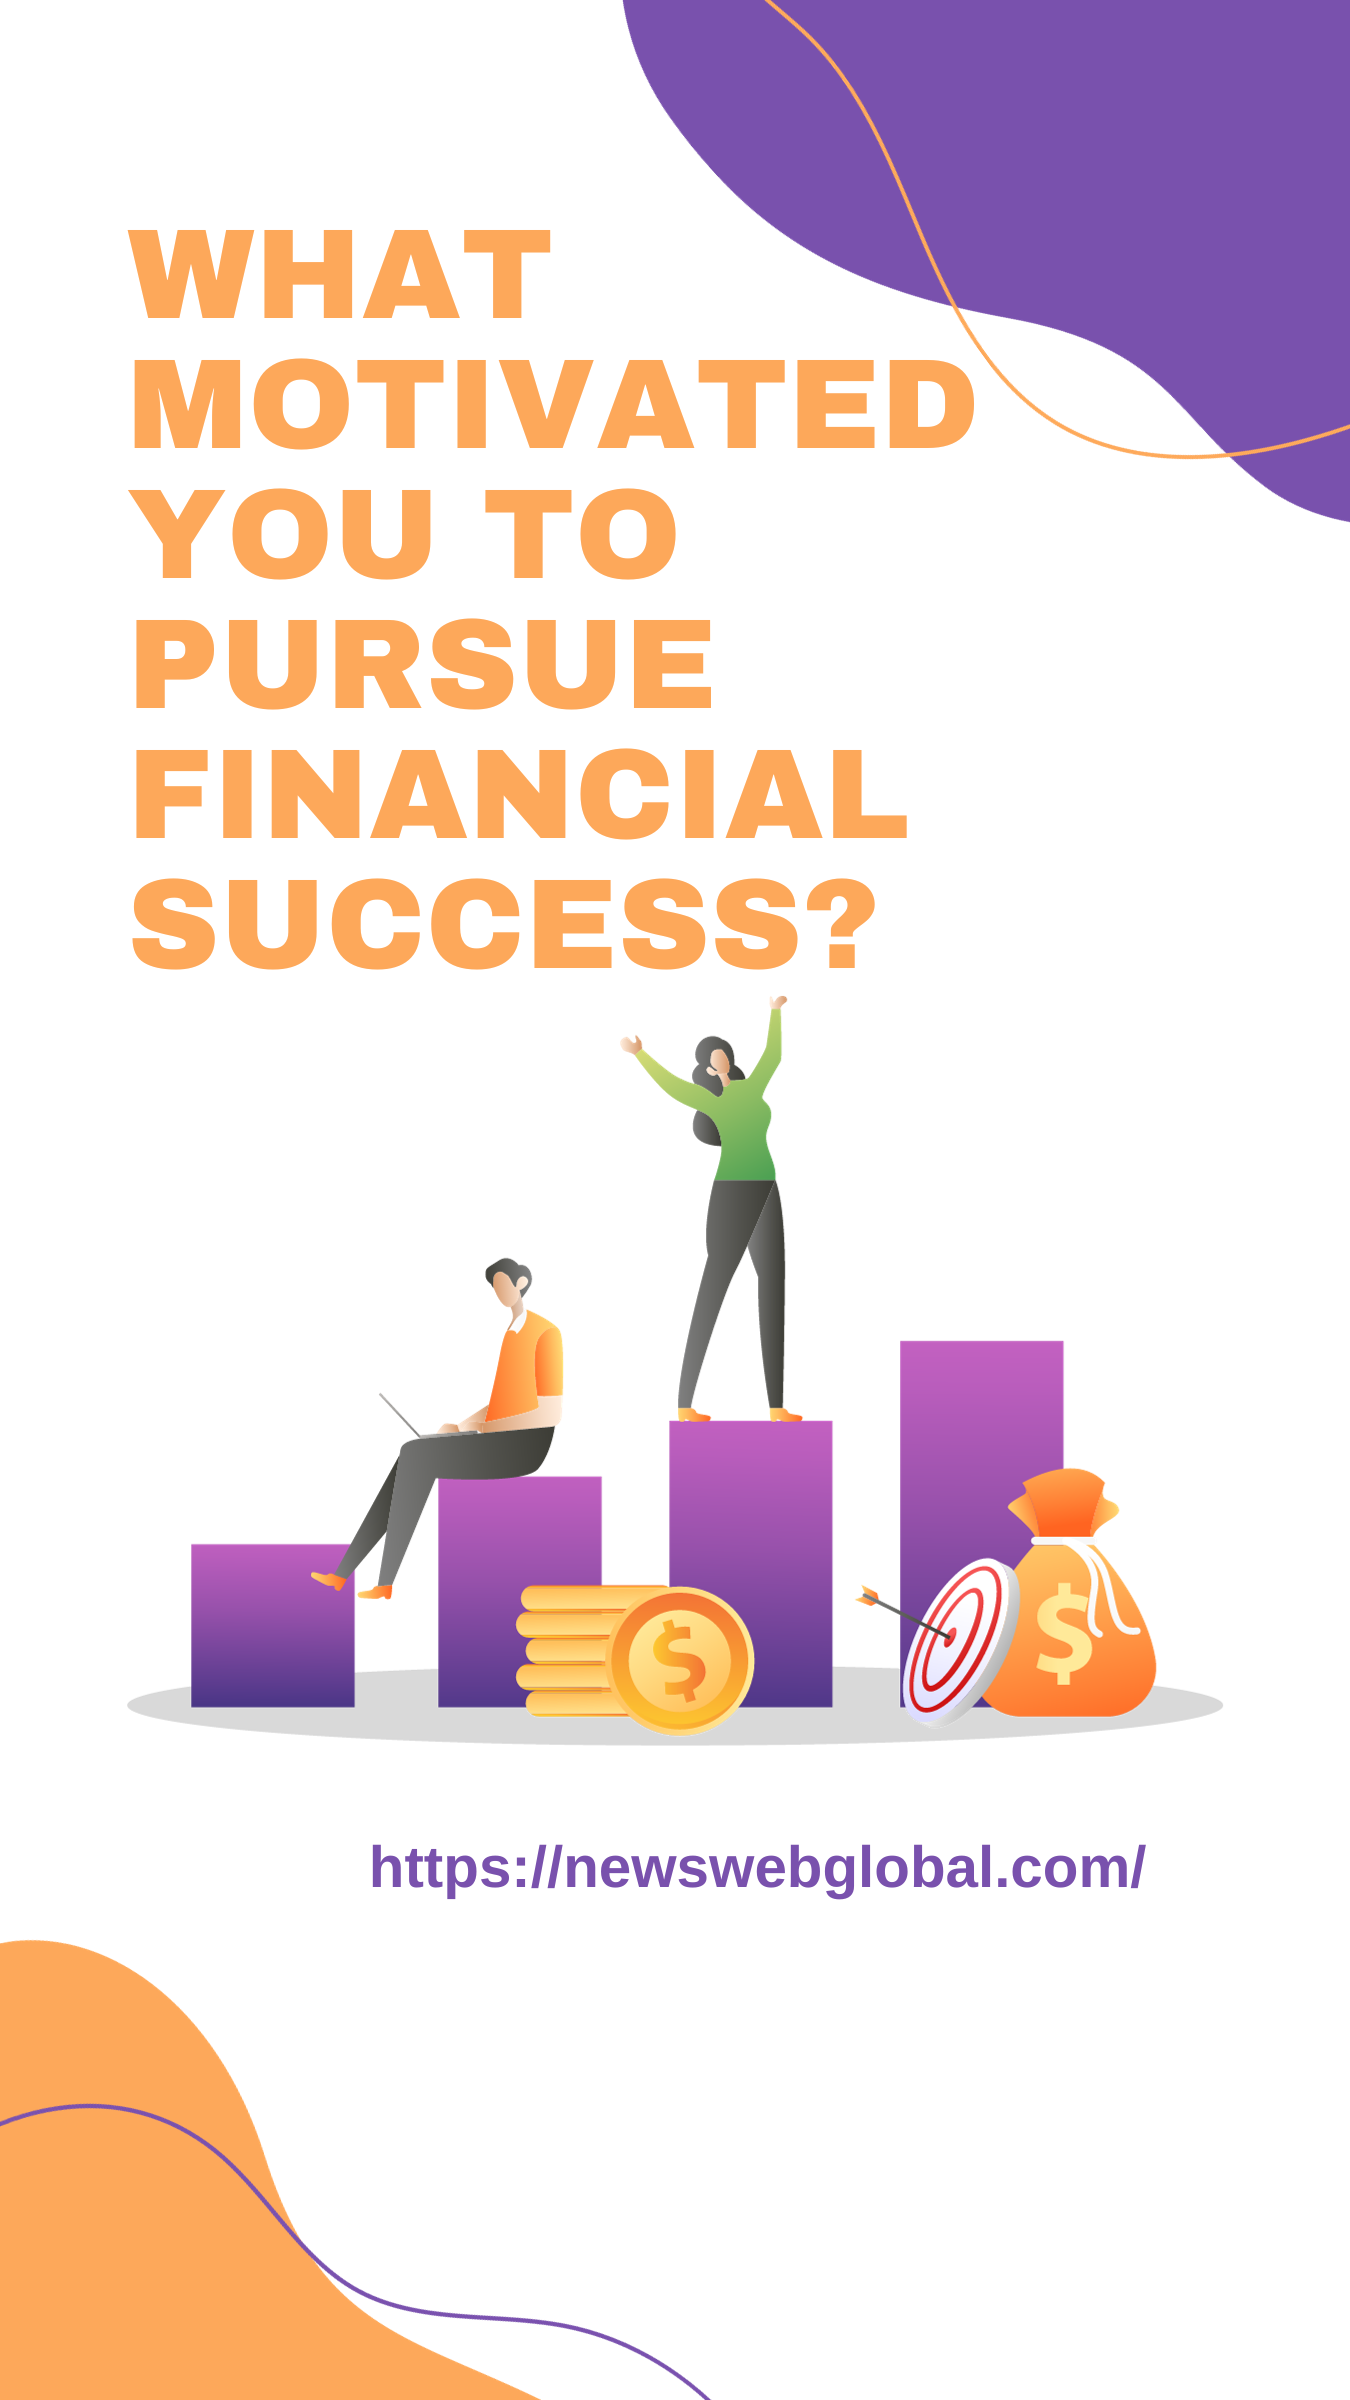 What motivated you to pursue financial success?